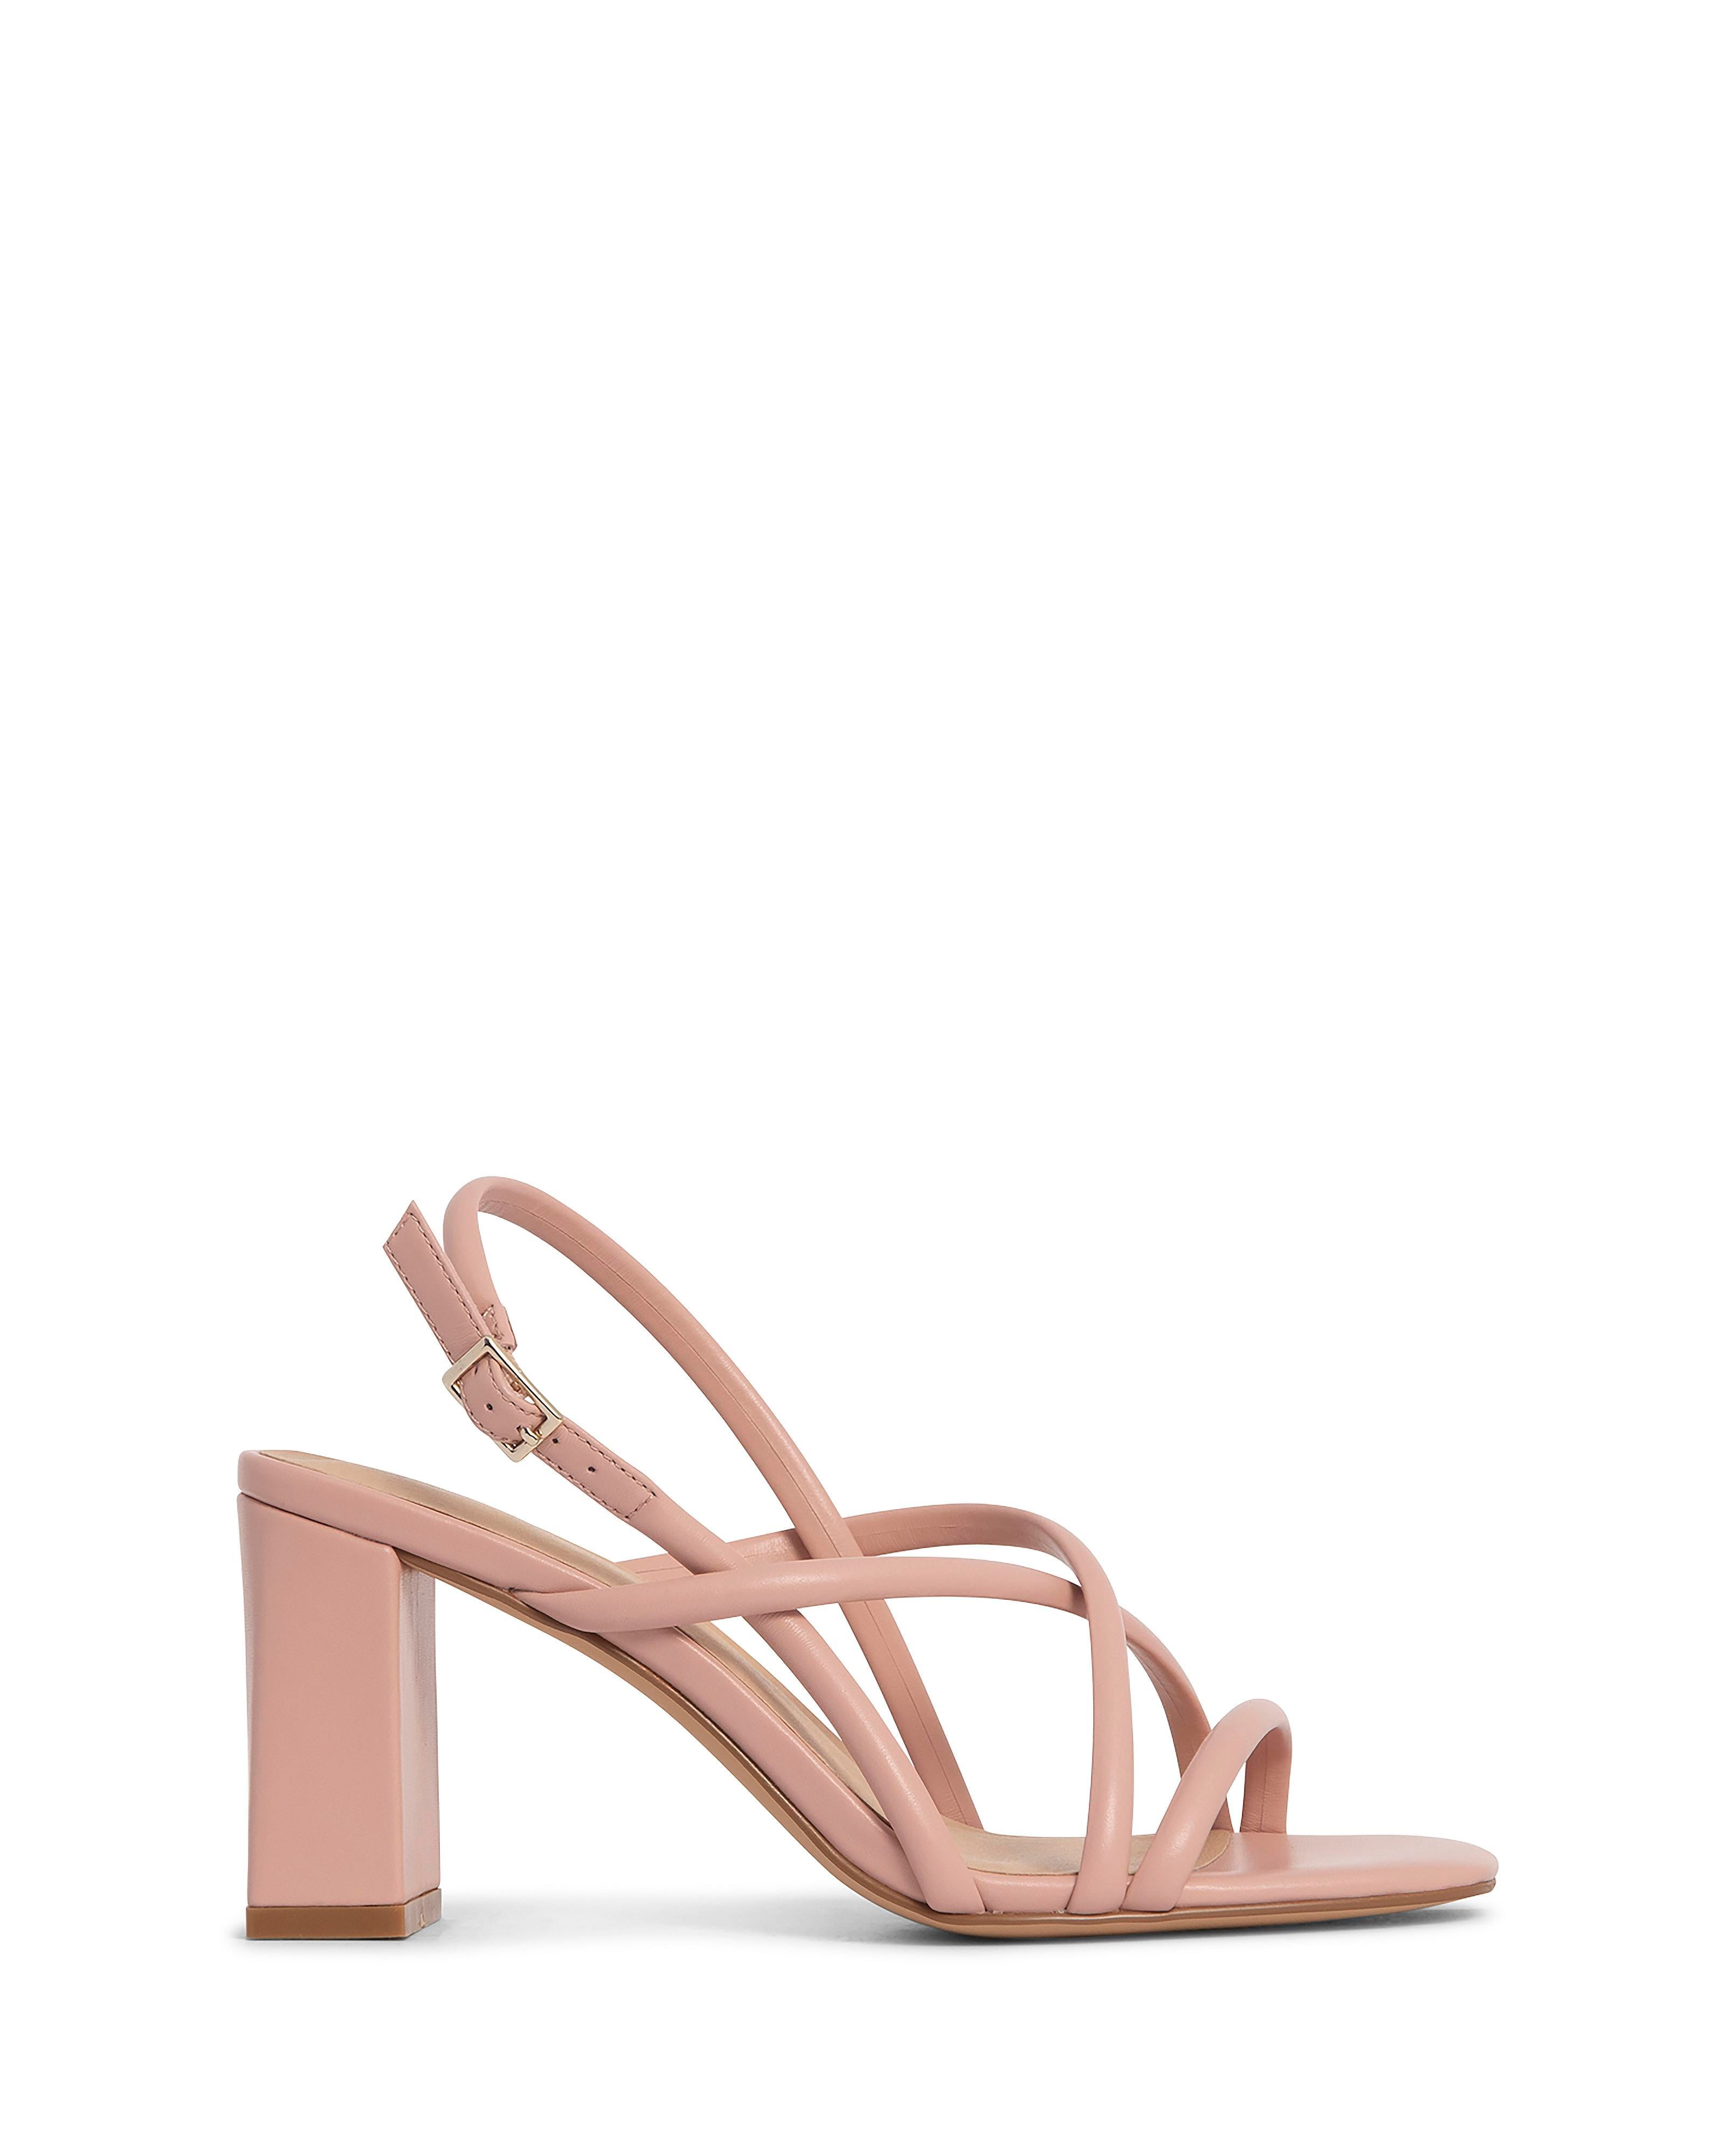 Kylie Blush 7.5cm Sturdy Block Heel with Criss Cross Leather Straps 